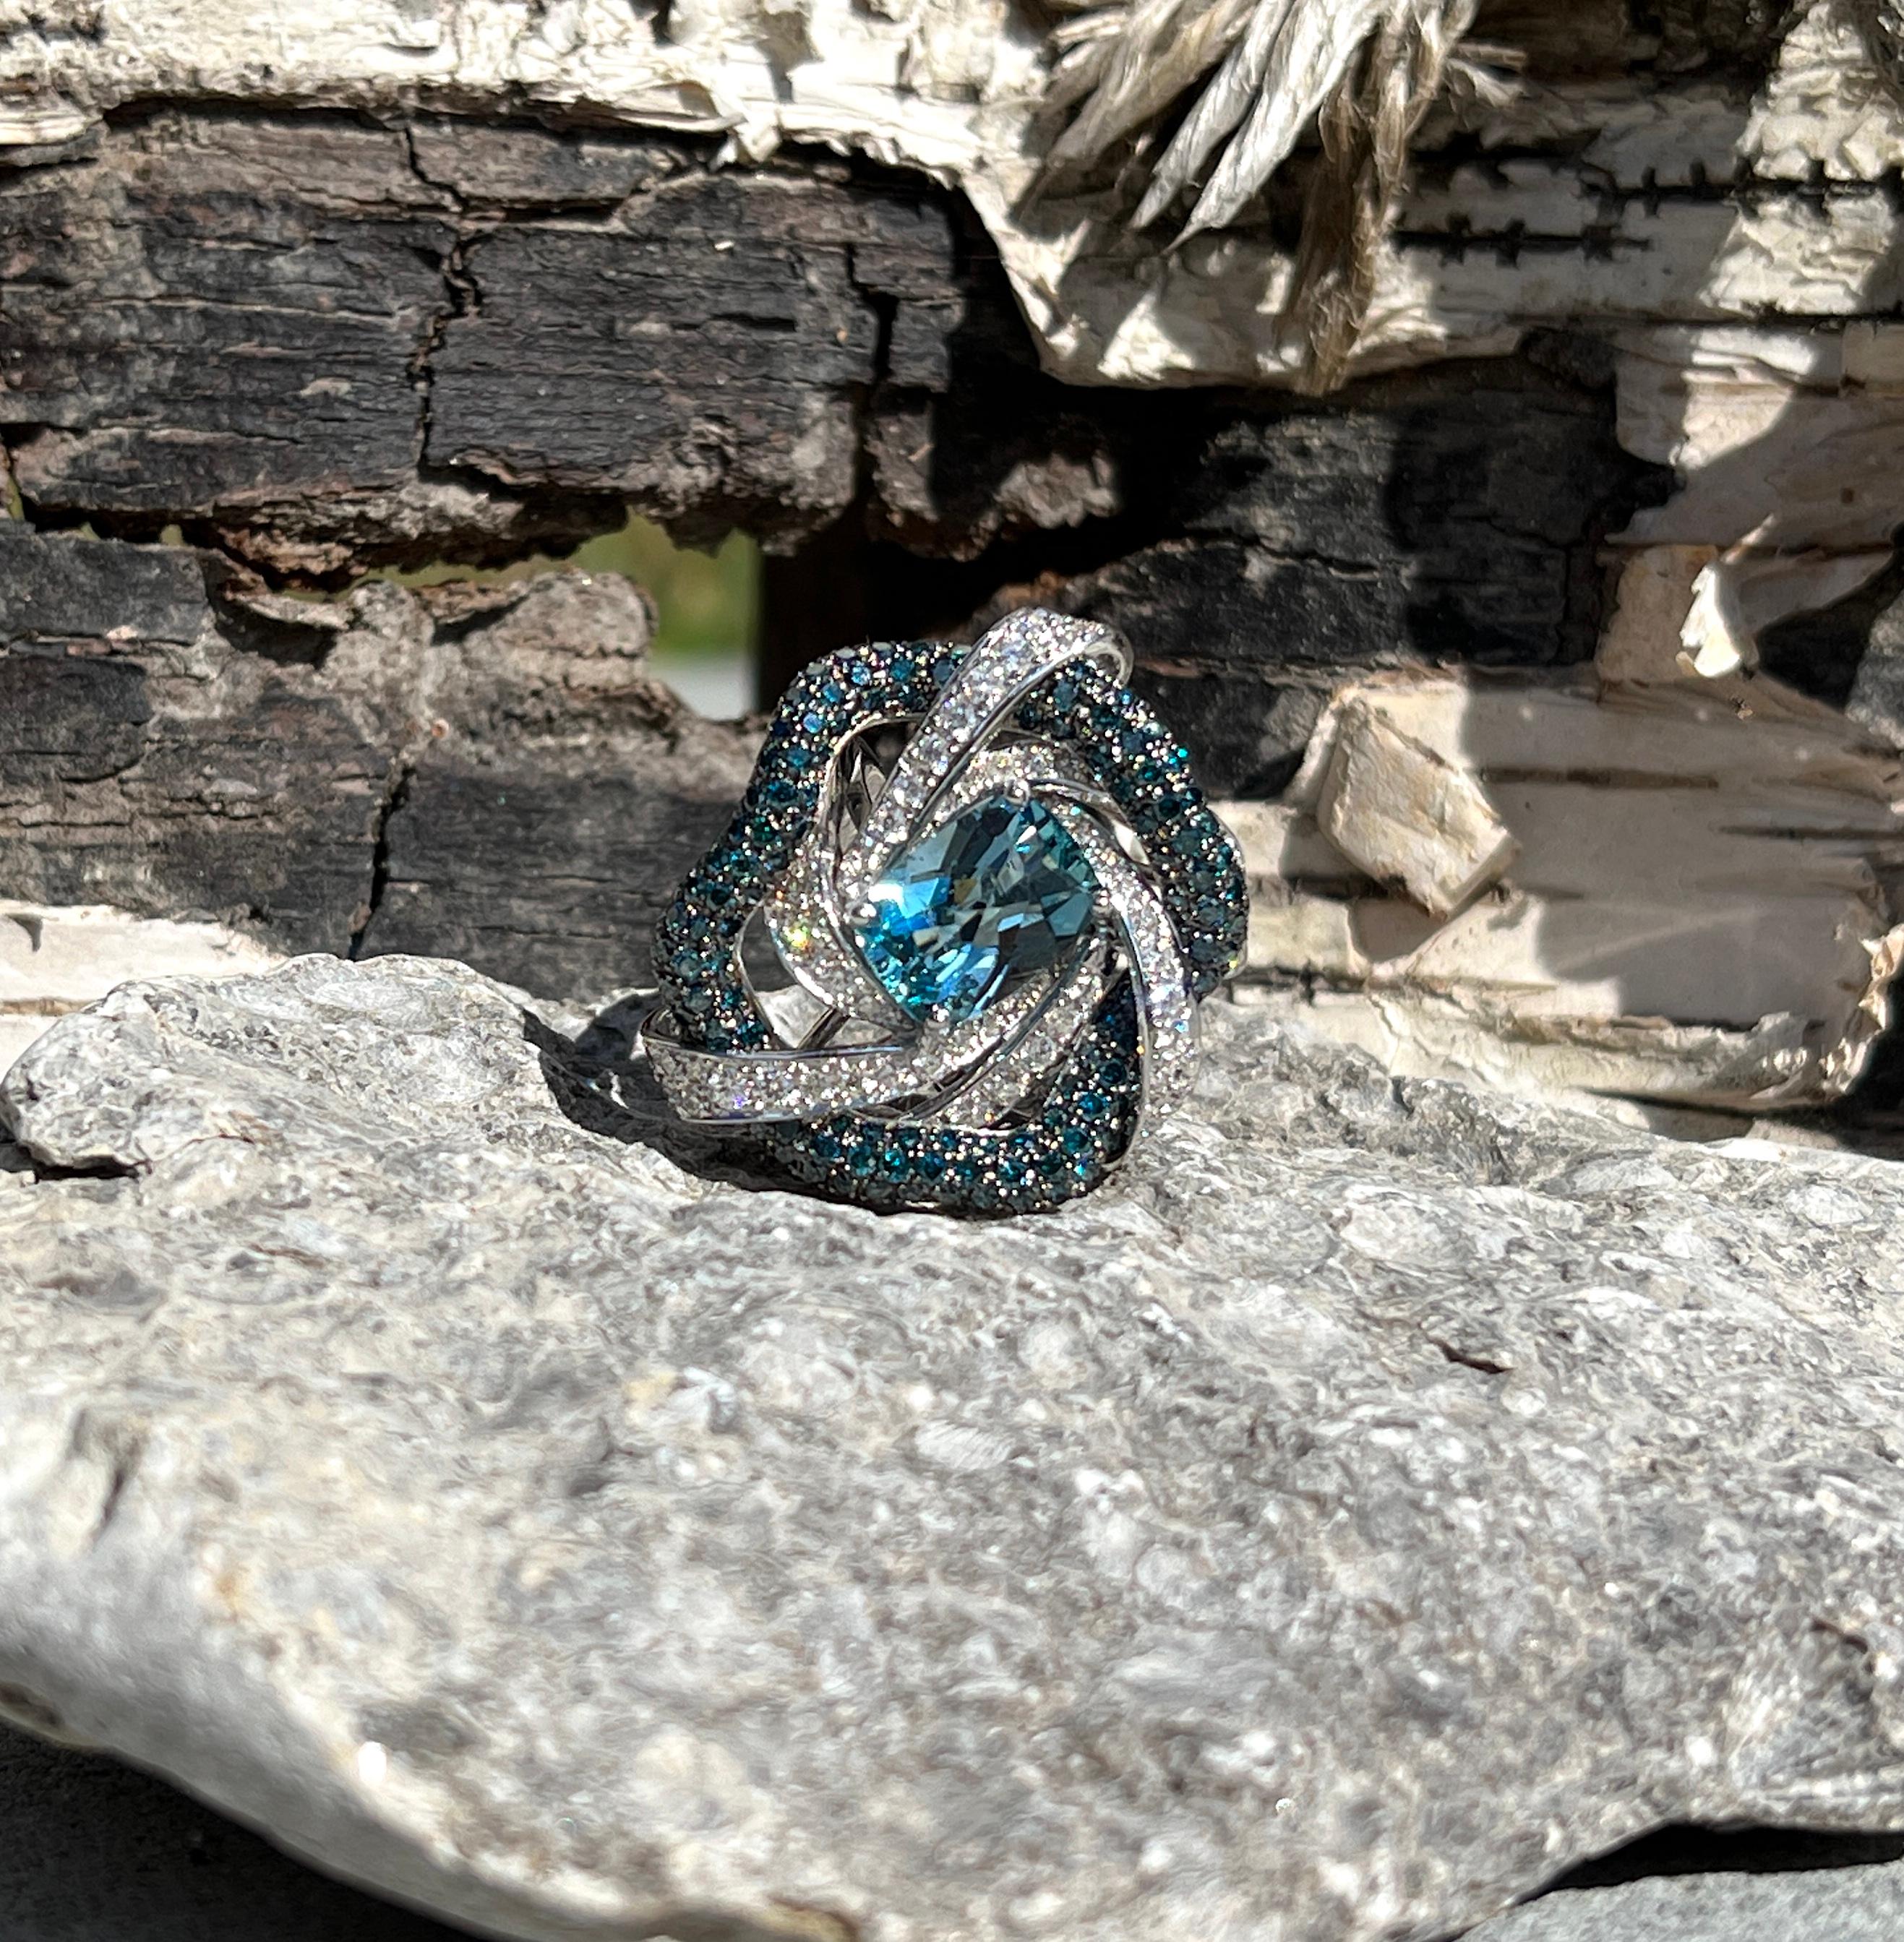 This large S. Georgios designer ring is made from 18 Karat White Gold and is all hand-made with microscopic settings. The gorgeous ring features 4.03 Carats of  Aquamarine in gorgeous color and 3.26 Carats of brilliant-cut Blue Diamonds and 3.04